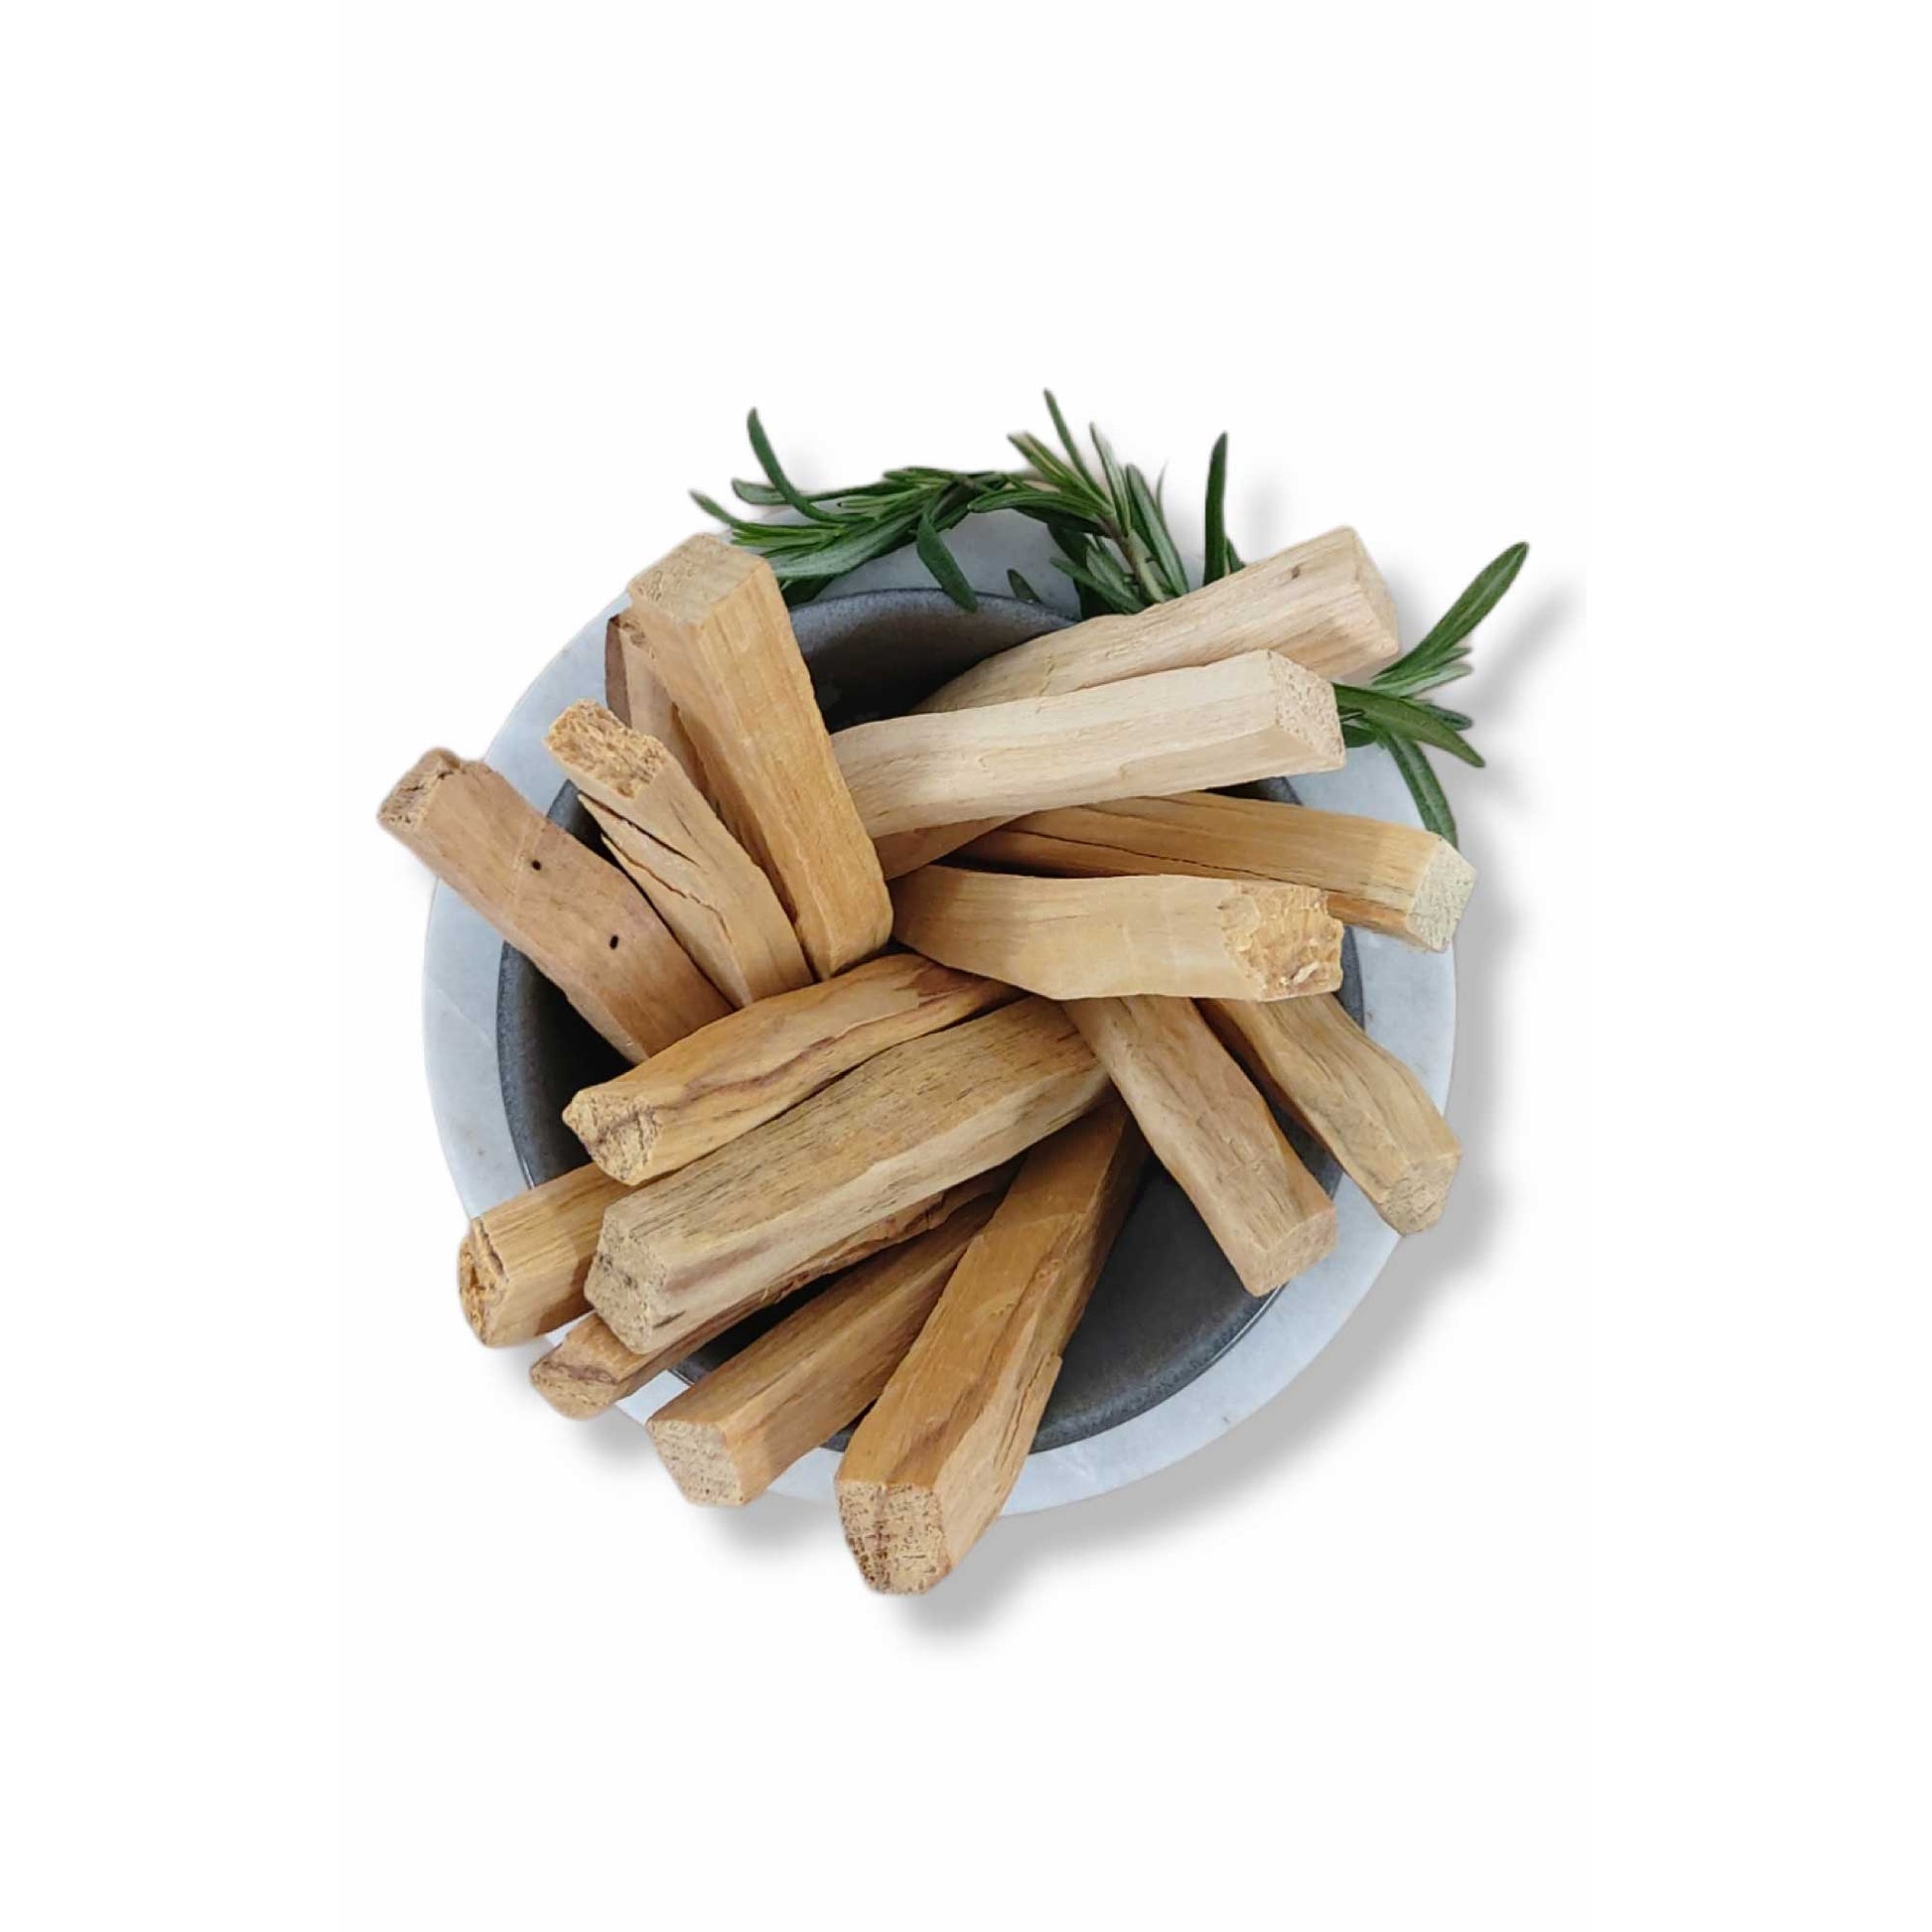 50g Palo Santo Smudge Sticks - Cleansing Smudging Incense Holy Wood